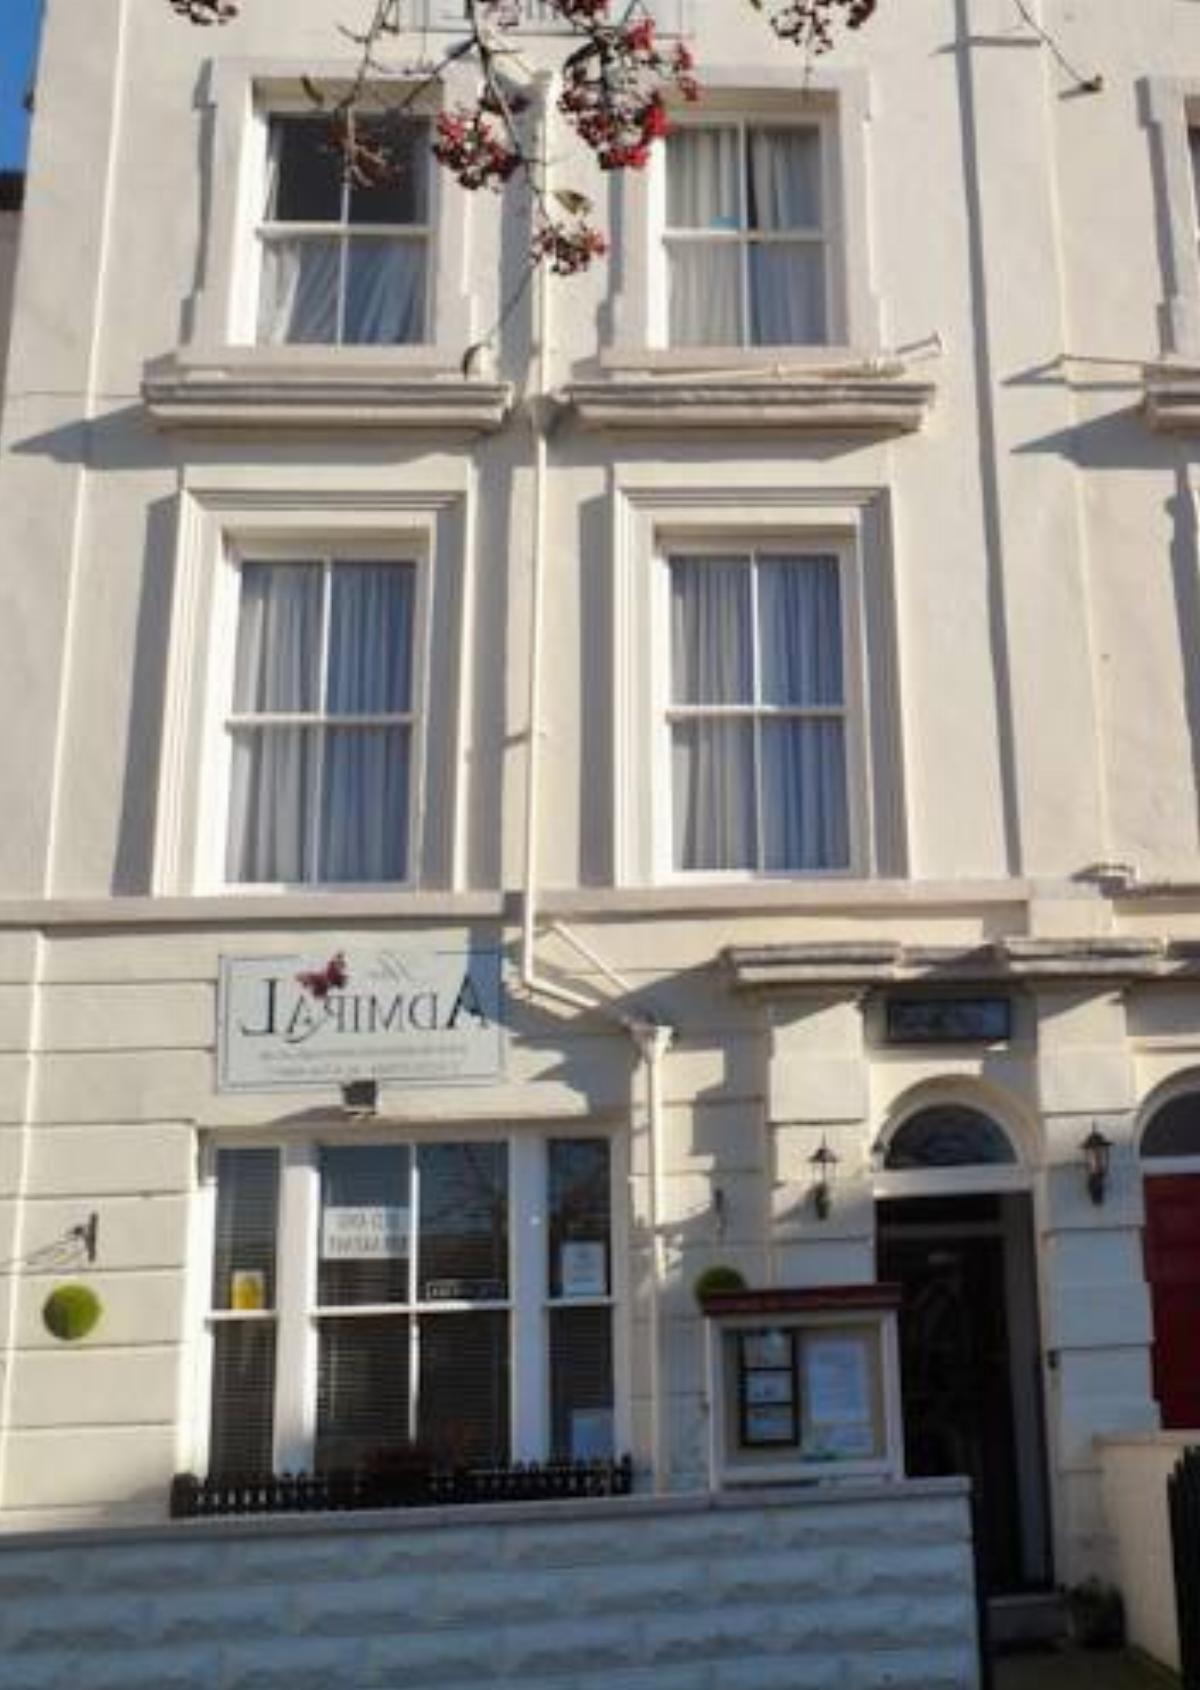 Admiral Guest House Hotel Scarborough United Kingdom